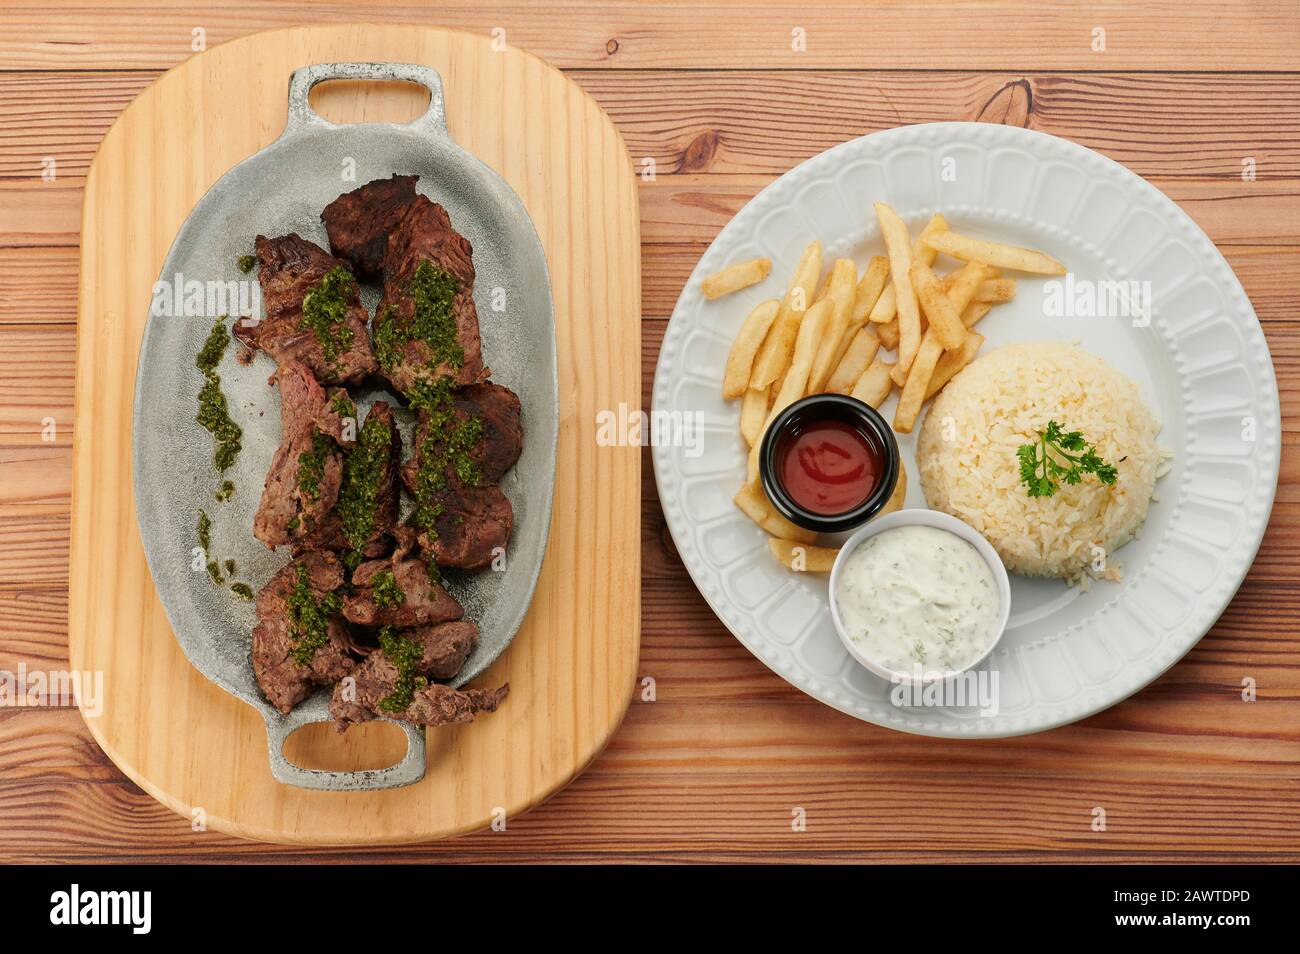 Steak with rice and french fries on 2 plates above view in wooden table Stock Photo